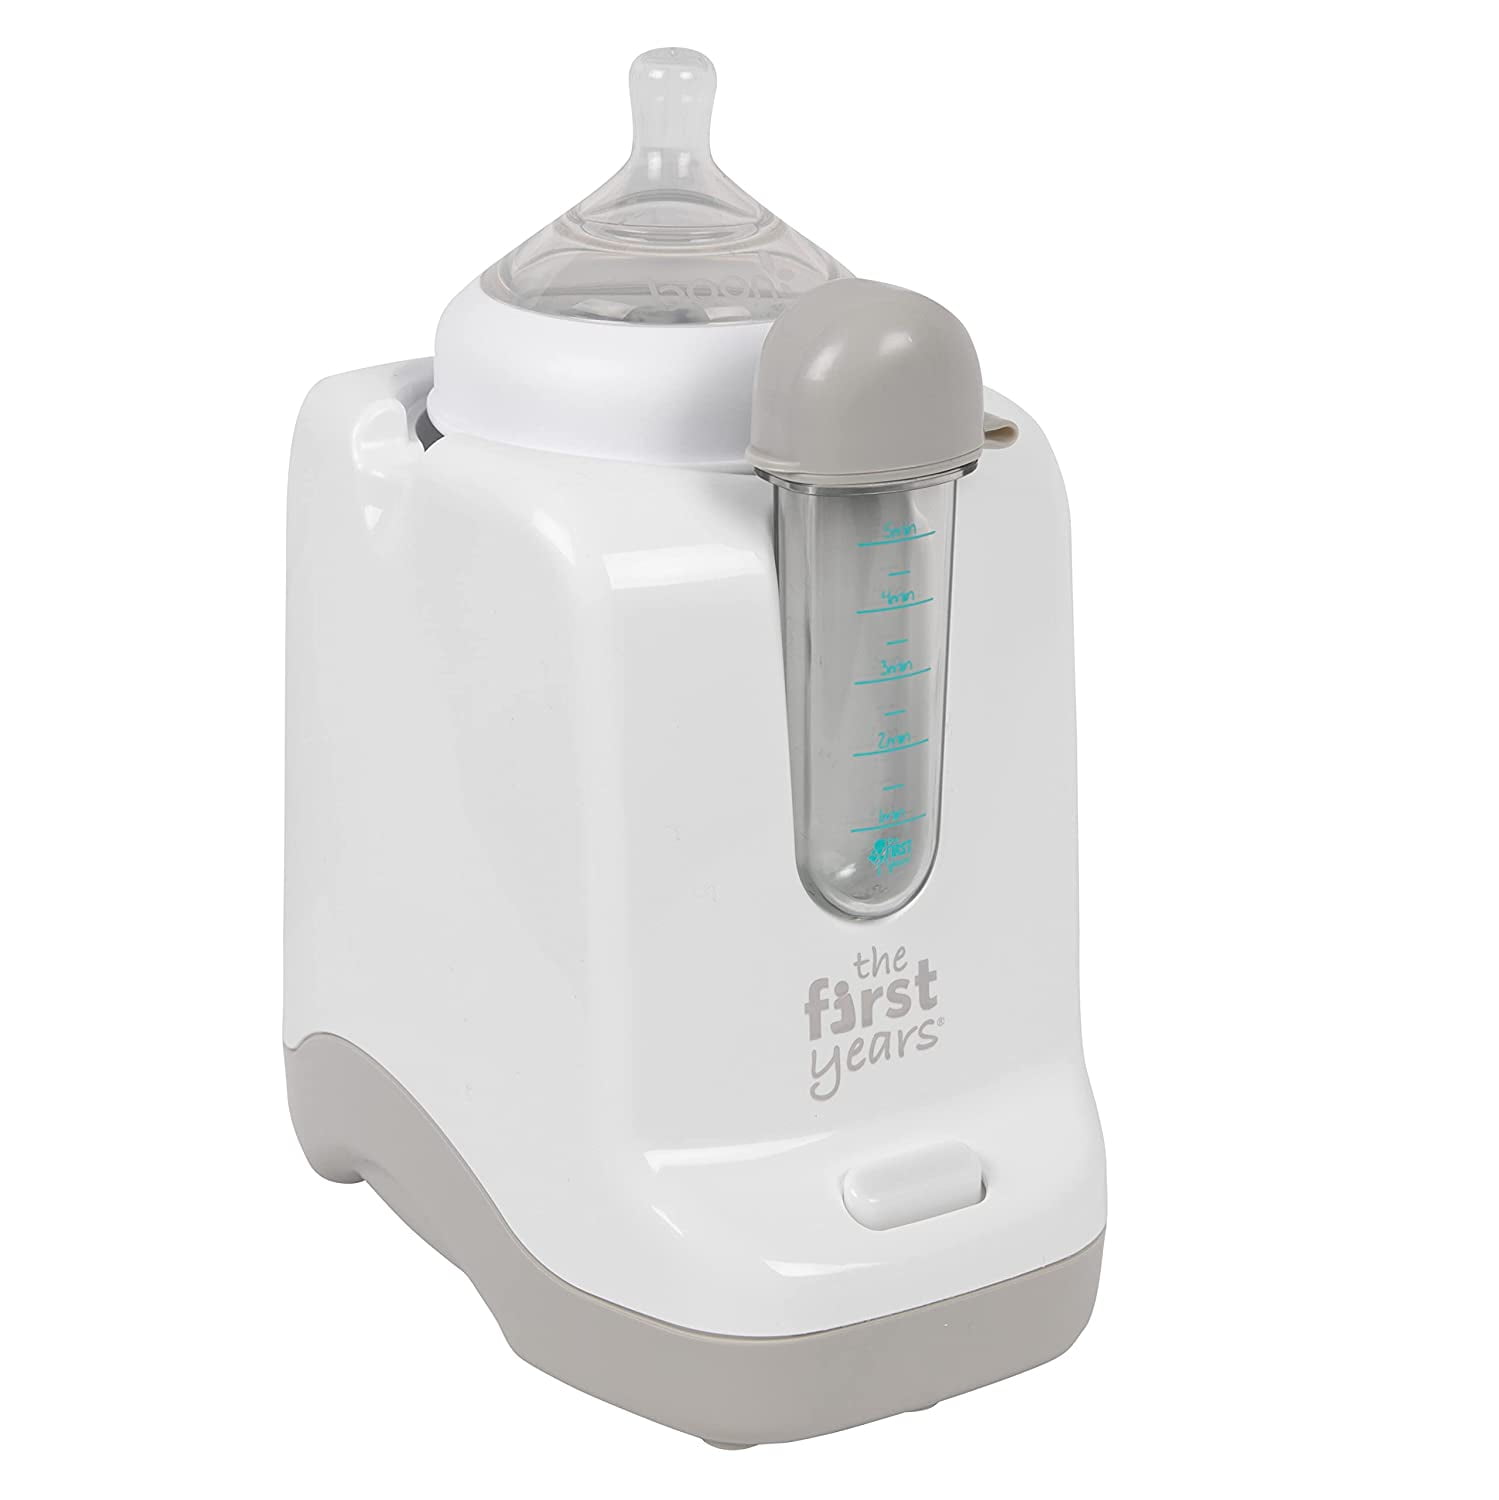 Sejoy Baby Formula Kettle Warm Water Dispenser for Making Formula Bottle  within 20s, Traditional Baby Bottle Warmer Replacement, Accurate  Temperature